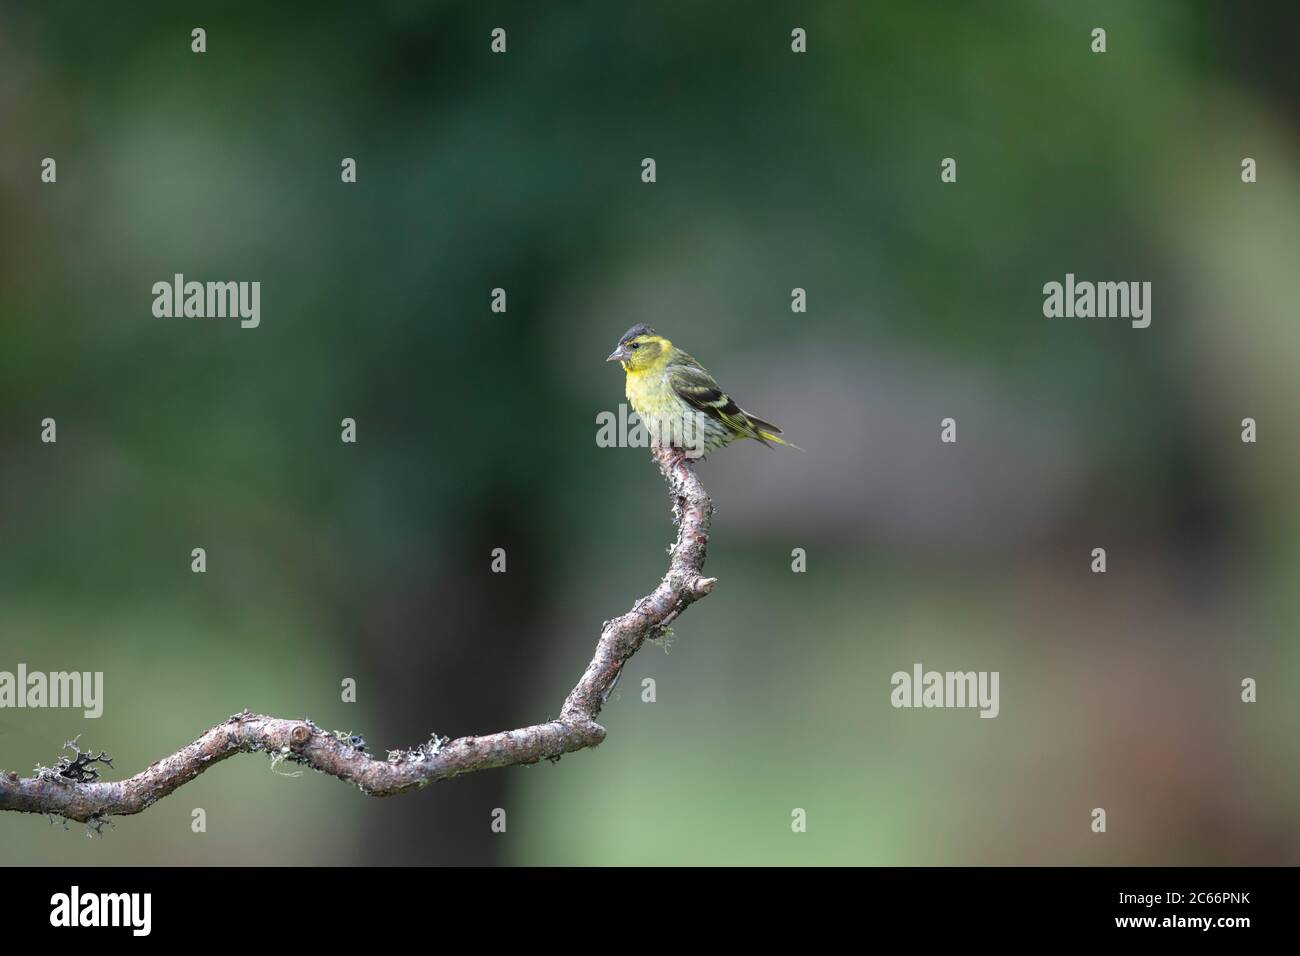 Siskin on a stick, blur forest in background Stock Photo